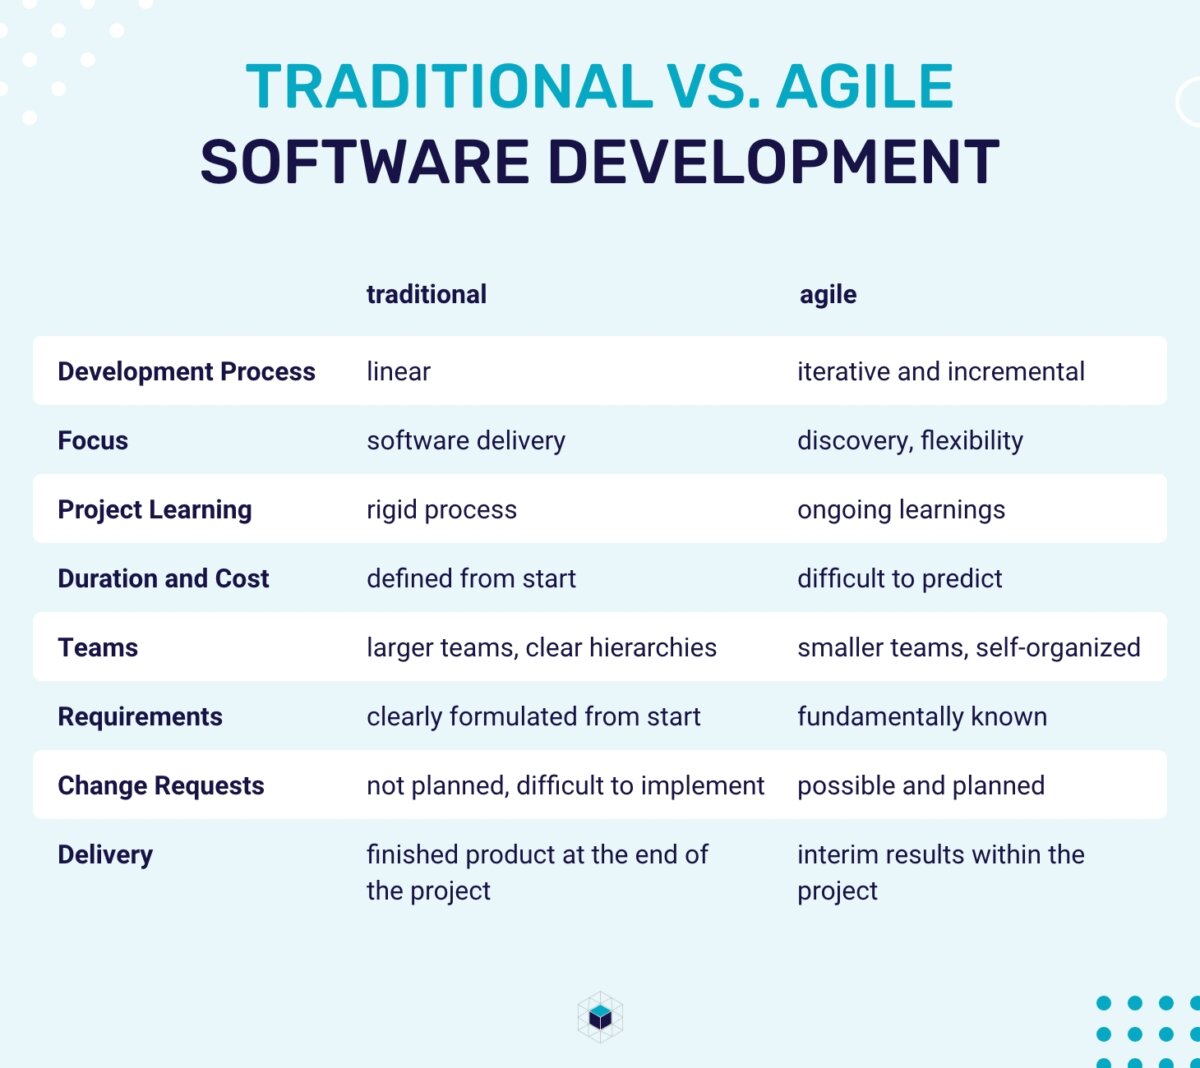 differences between traditional and agile software development